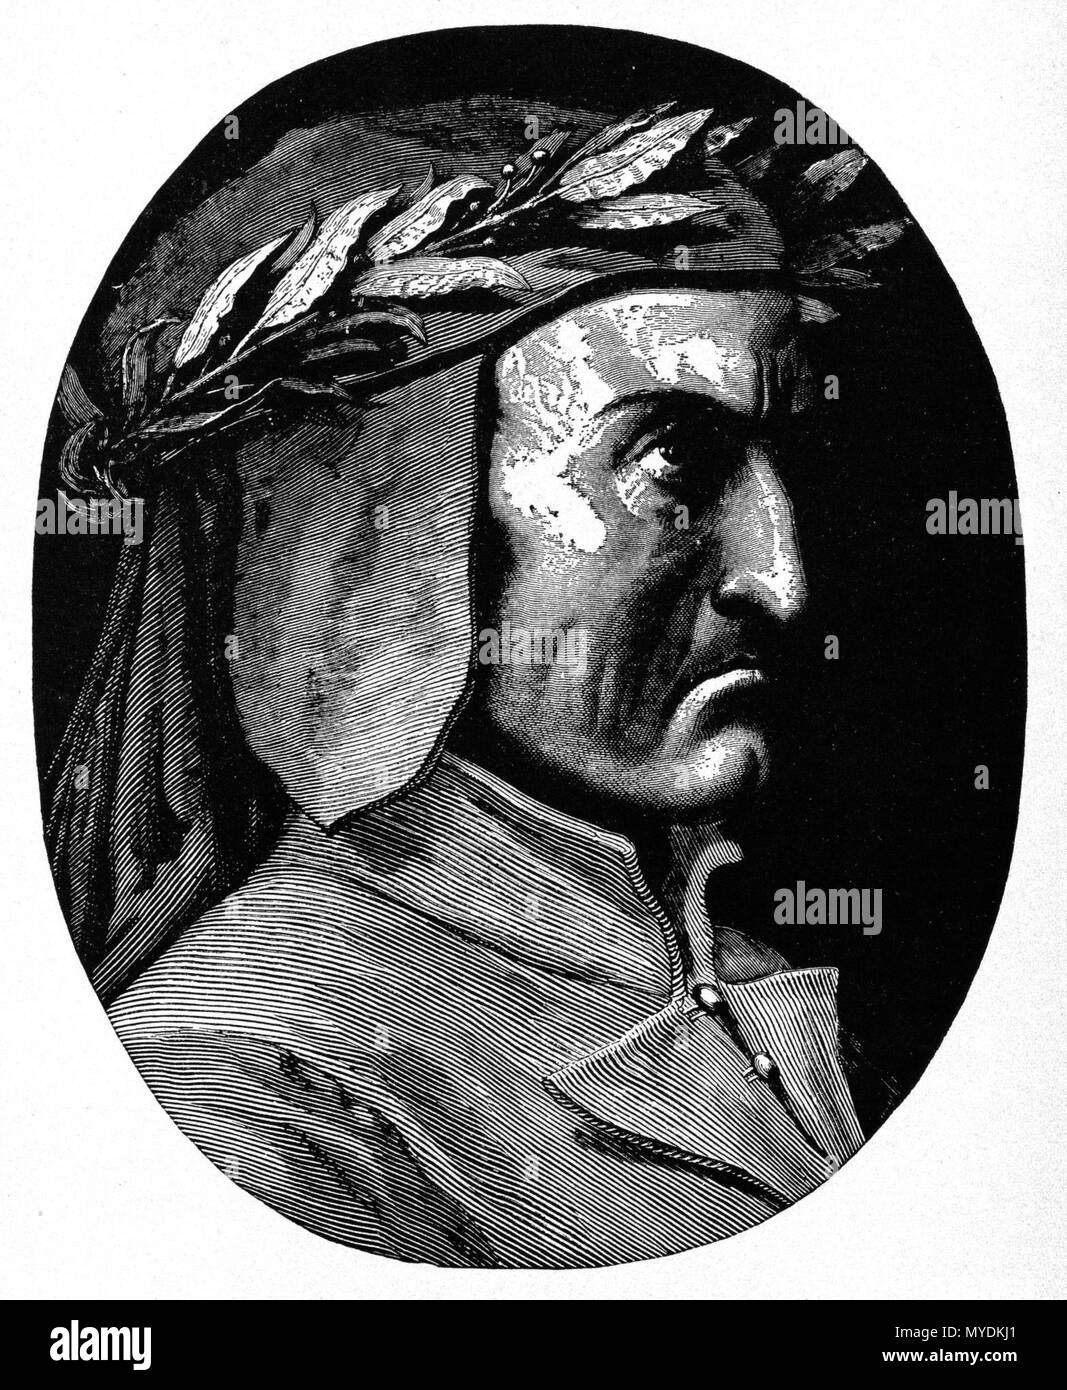 . High resolution scan of engraving by Gustave Doré portraying Dante Alighieri. 30 January 2008. scanned, post-processed, and uploaded Karl Hahn 150 DVDanteAlighieriPortrait m Stock Photo